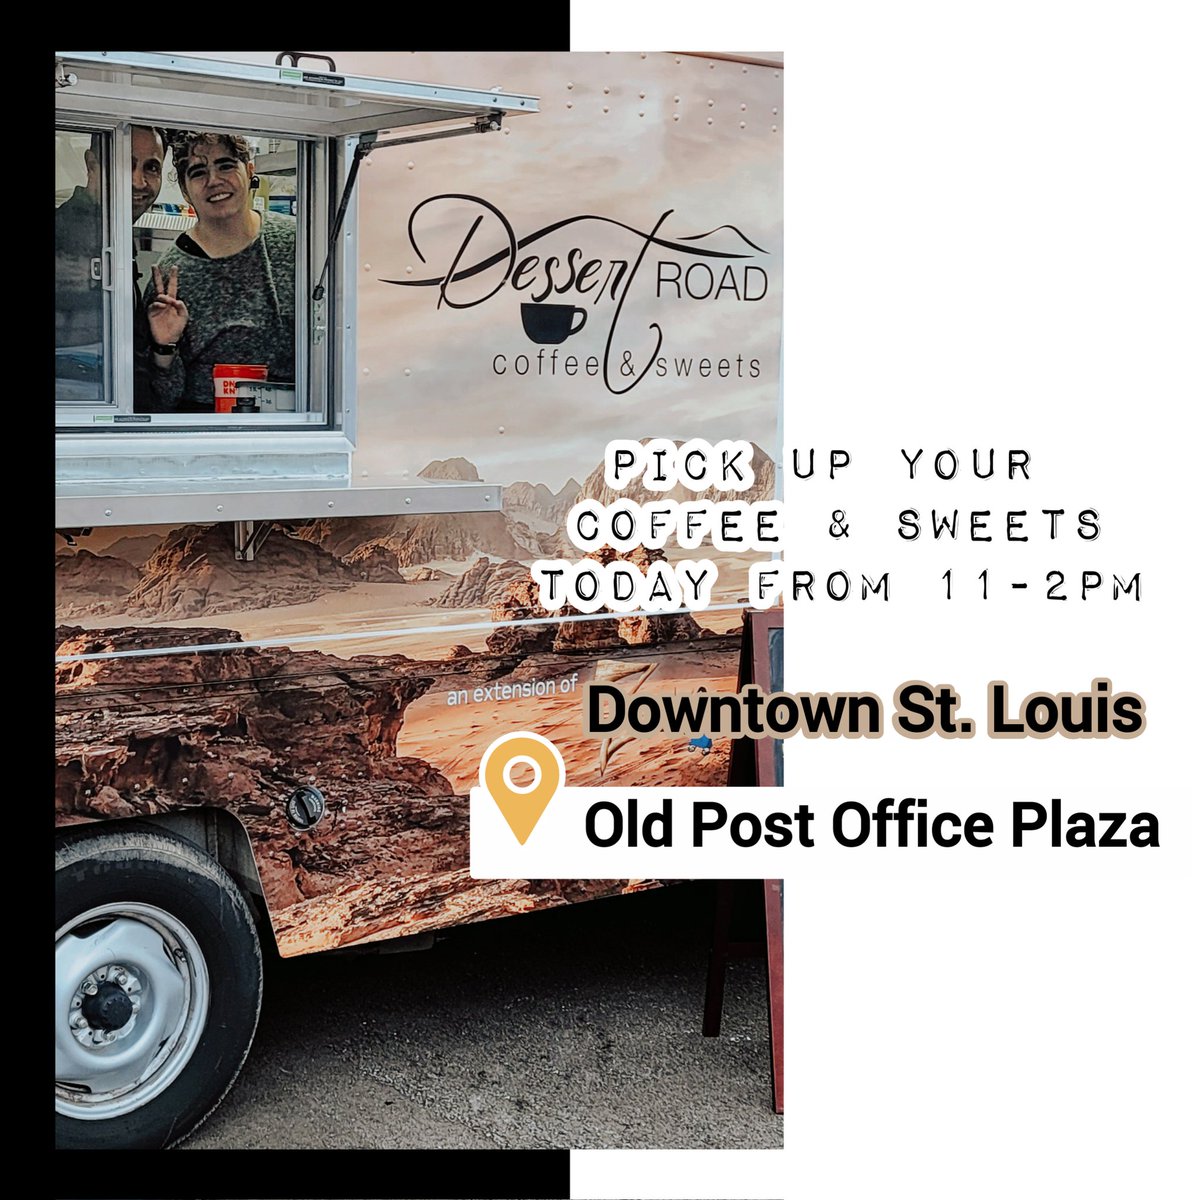 Today is the day! Dessert Road will be filling into downtown St. Louis at the Old Post Office Plaza from 11-2pm! 

#lunchtimelive #downtownstl #oldpostofficeplaza #dessertroadstl #stlcoffee #stlfoodtrucks